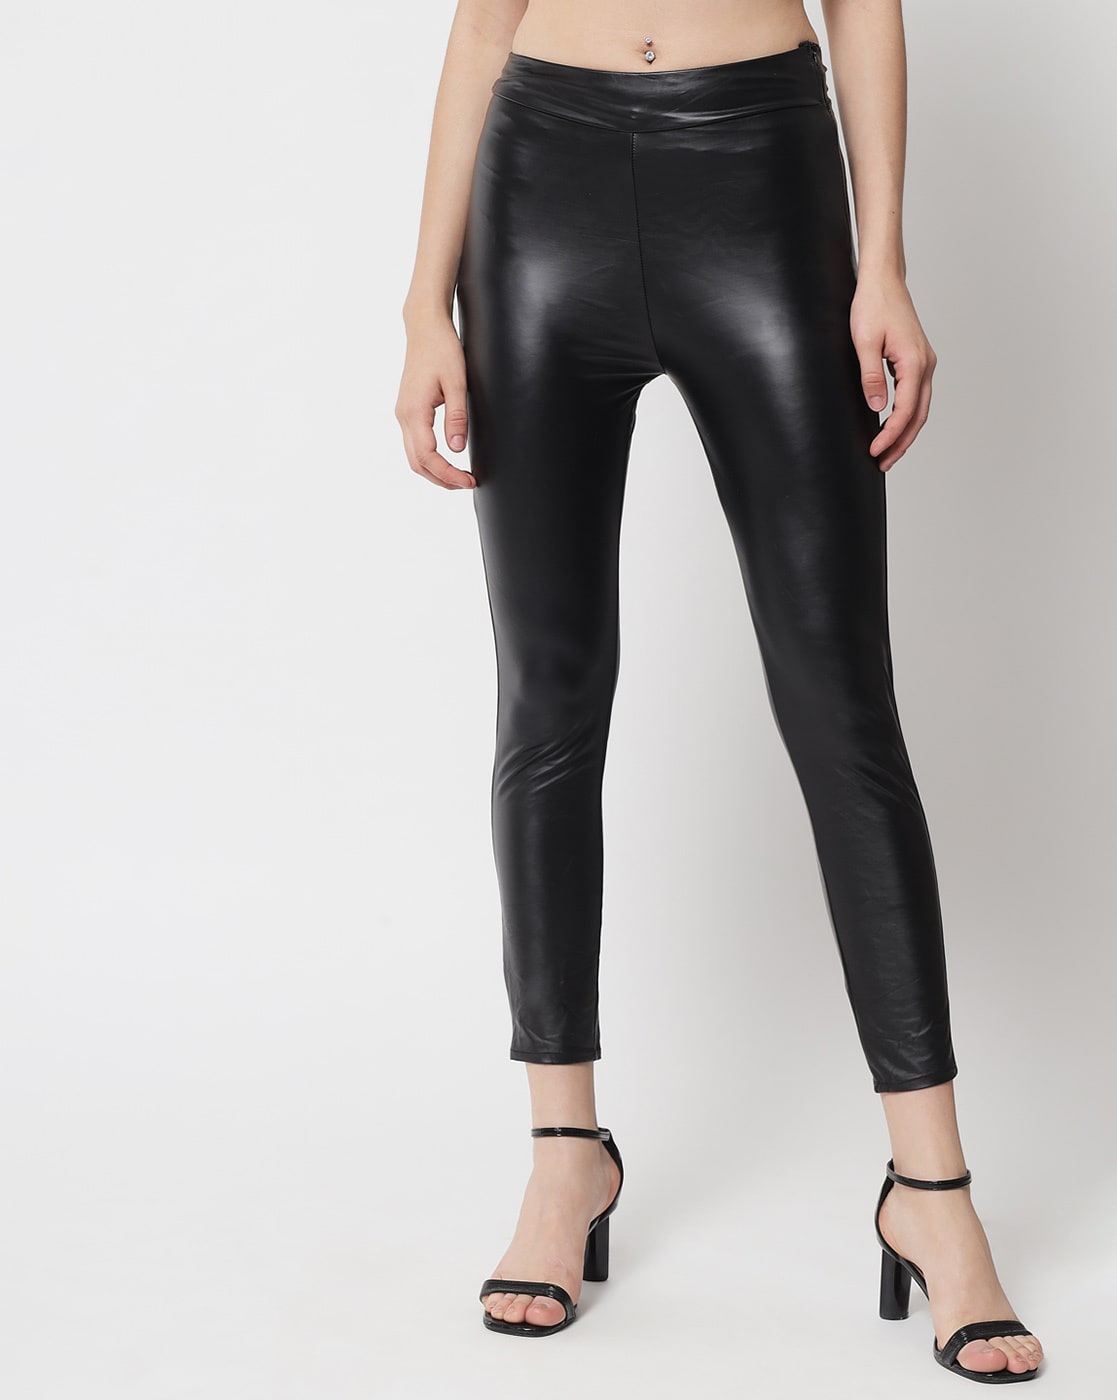 ASOS LUXE leather look skinny trouser with lace up detail in black  ASOS